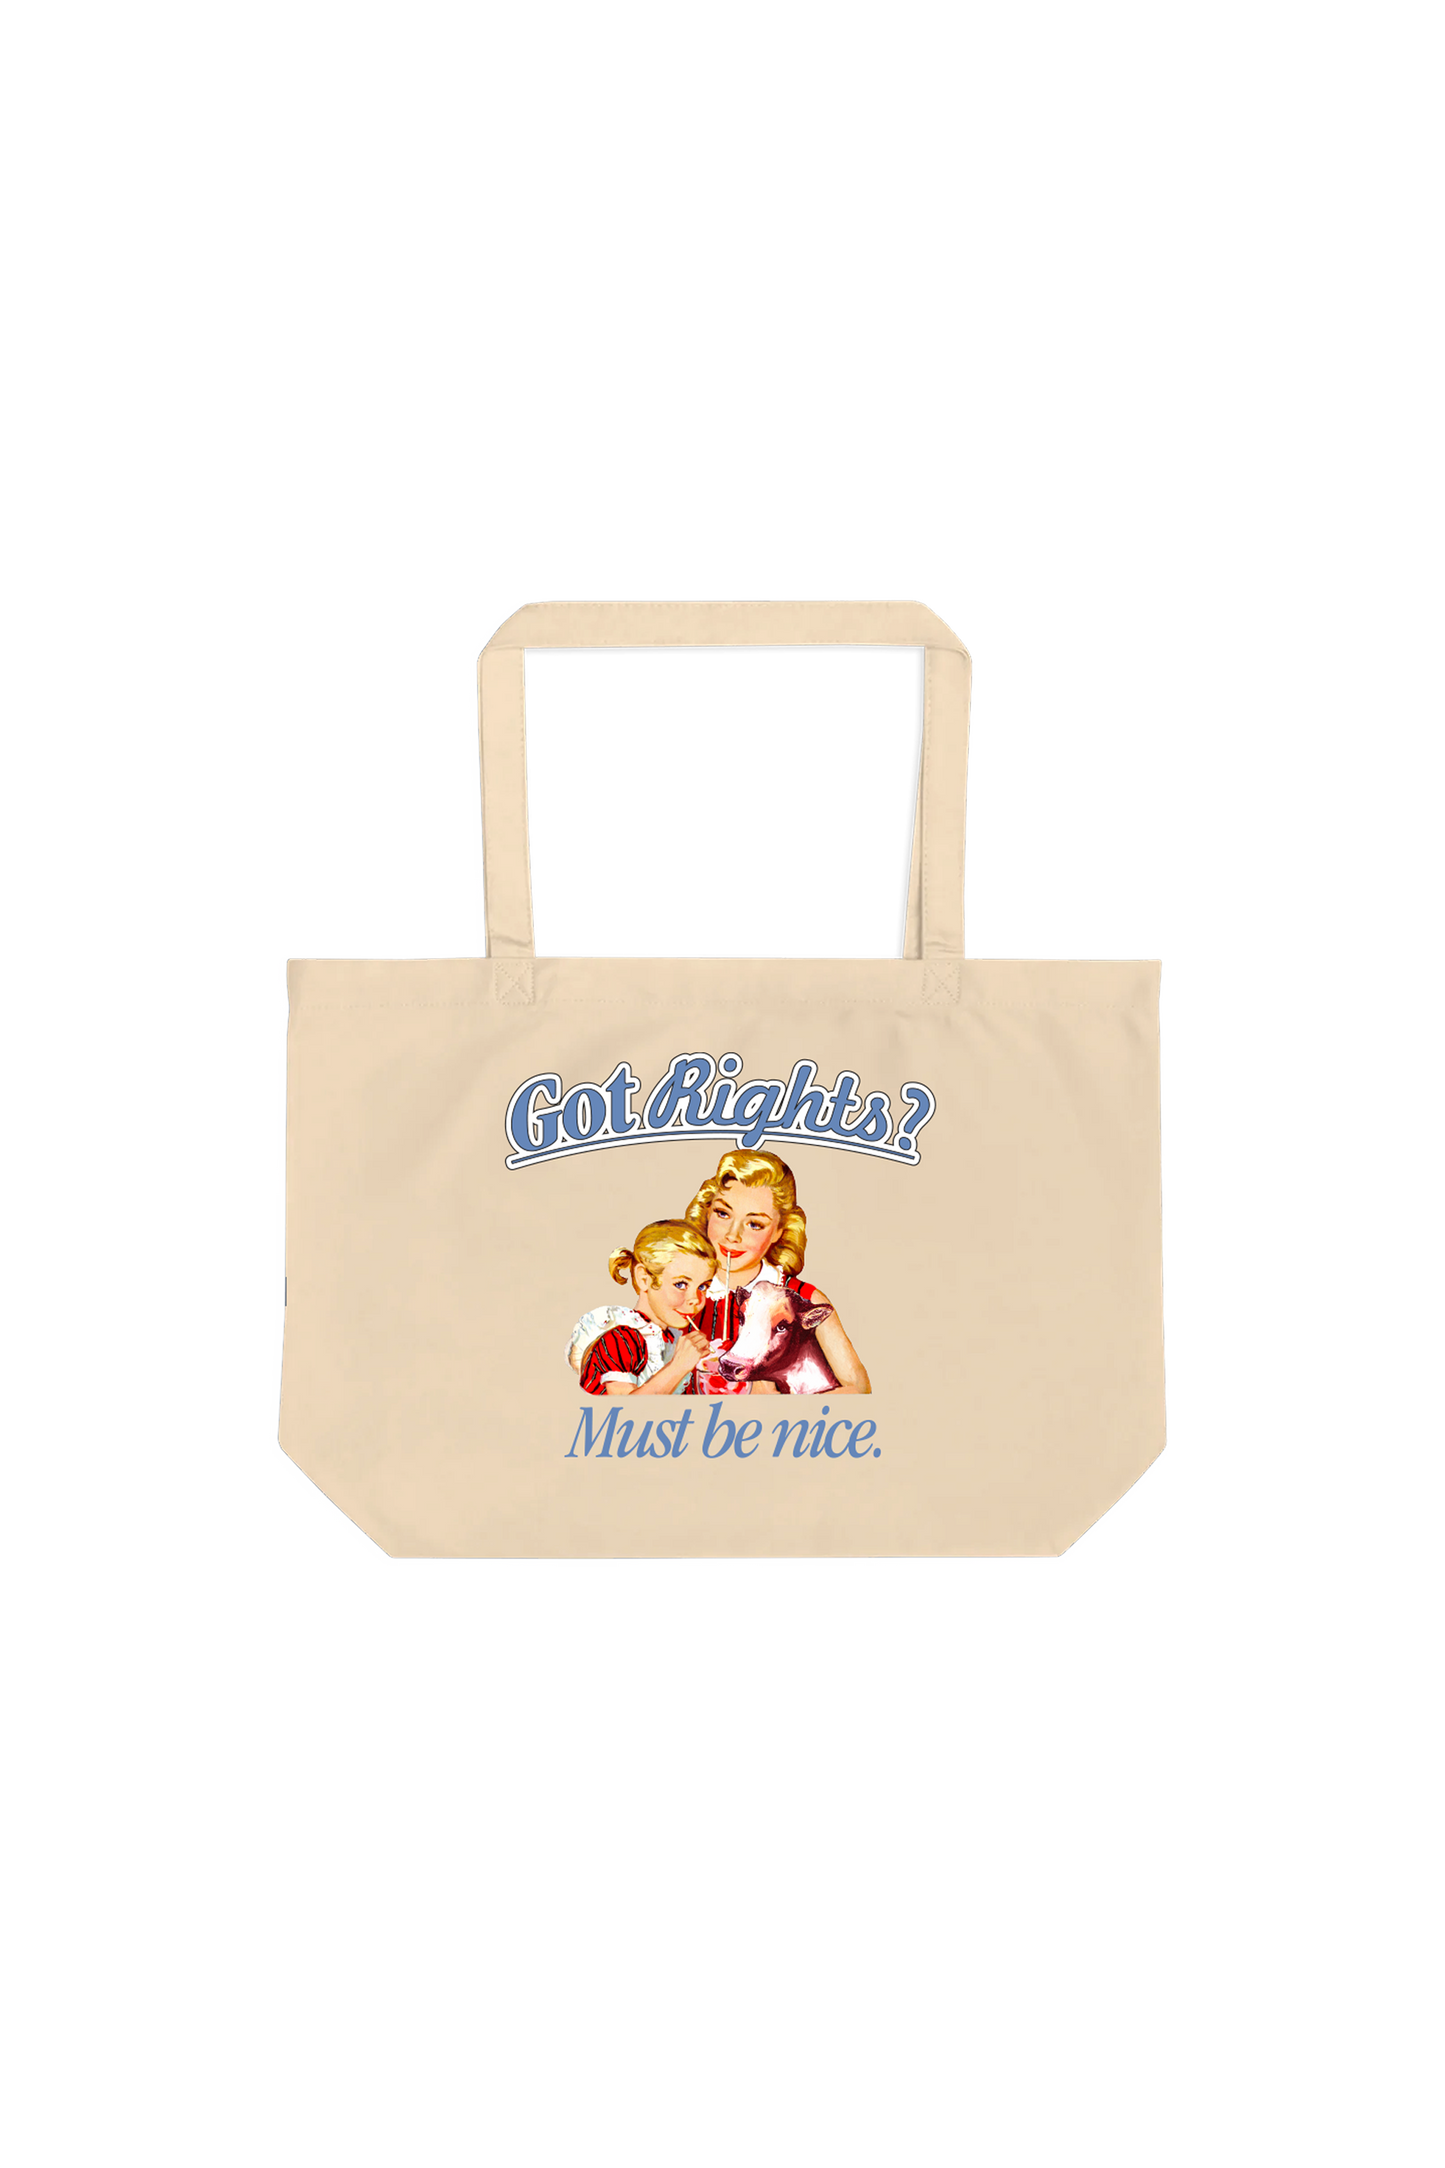 GSG x Itsgpf Got Rights Nude Tote